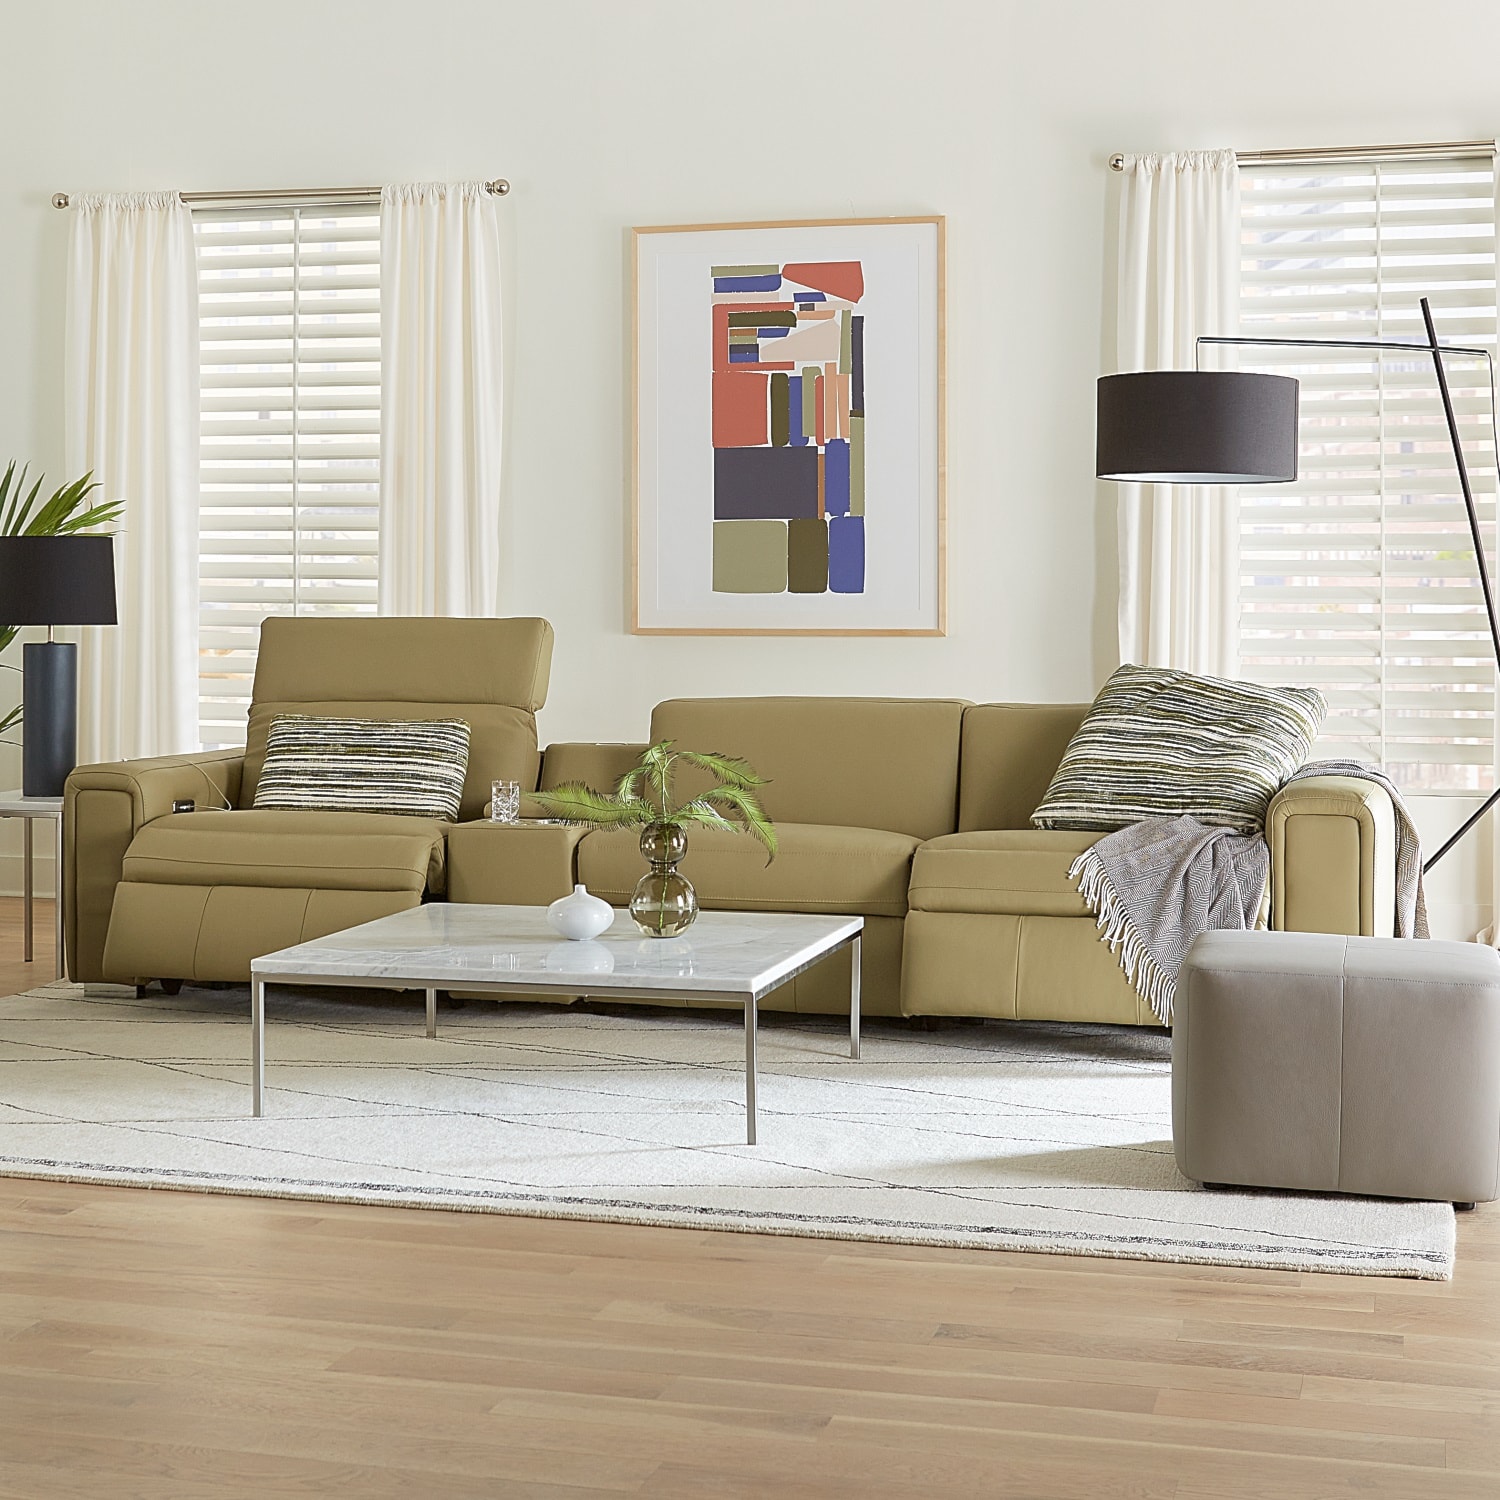 Olive sectional with colourful art